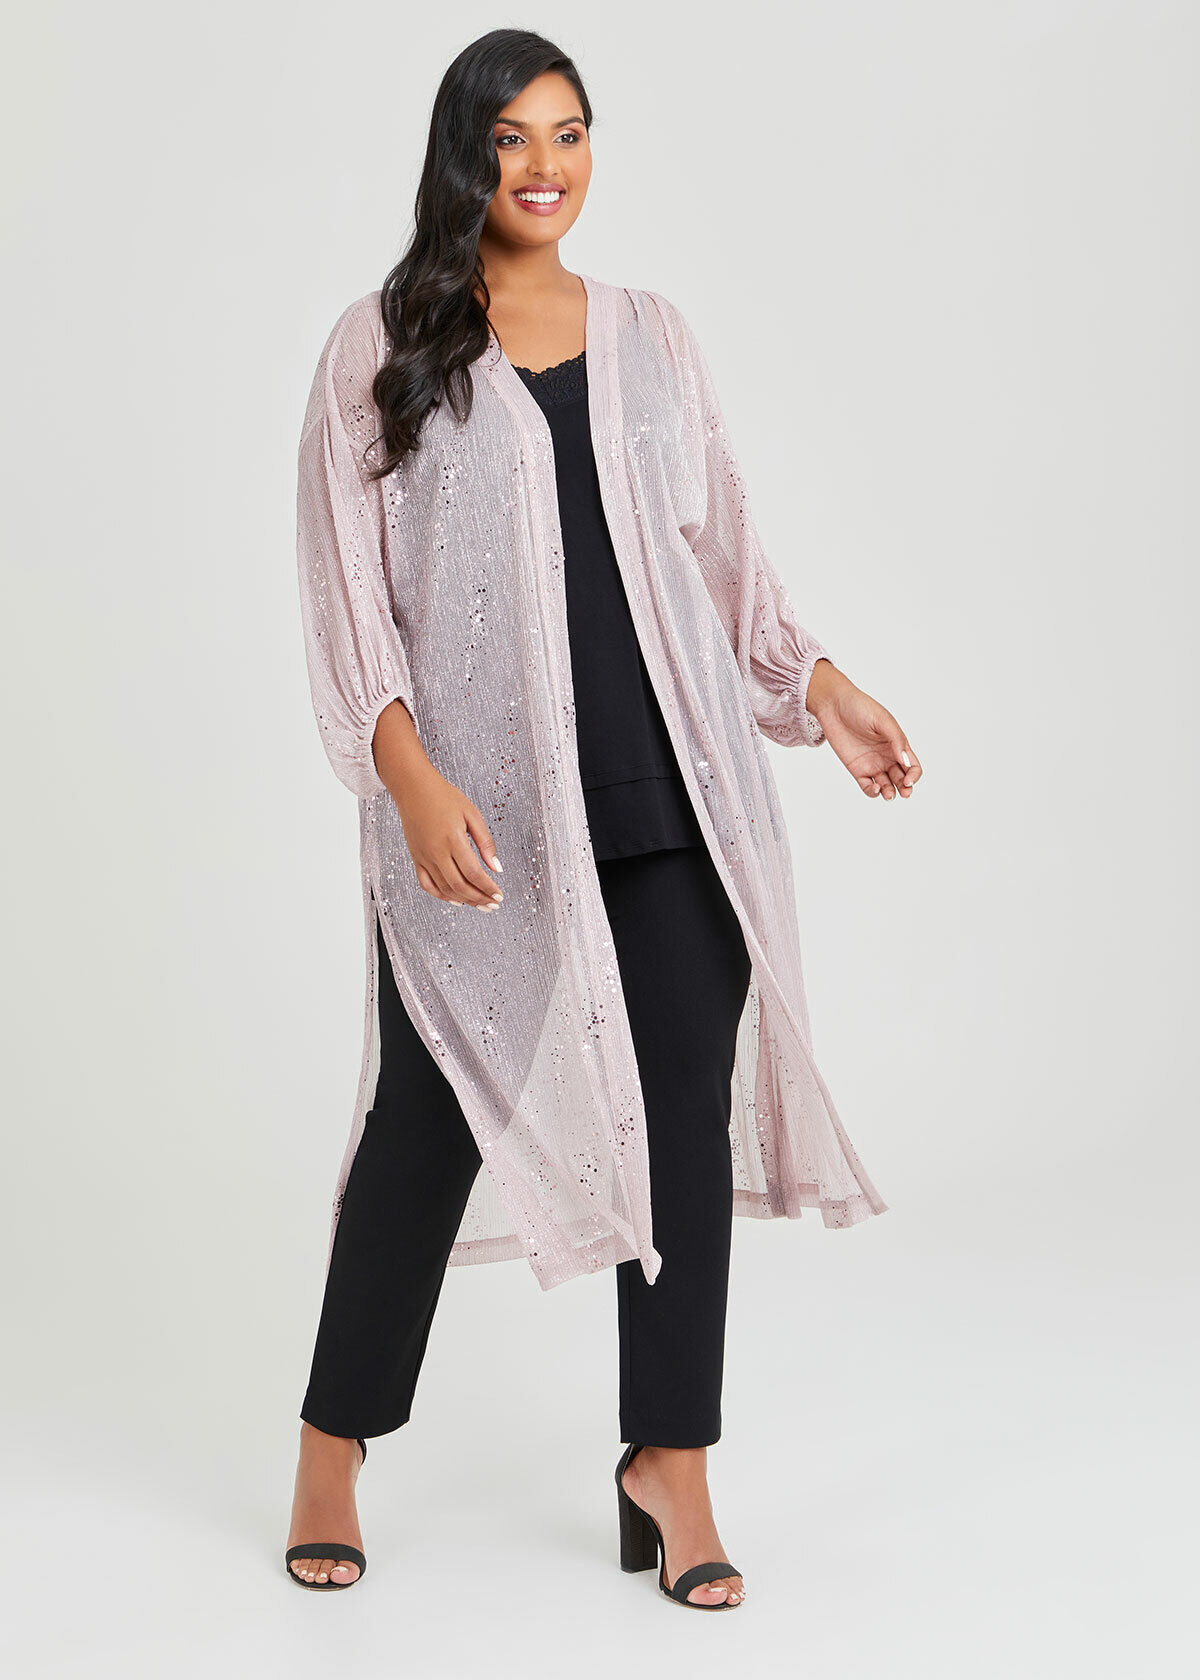 Plus Size Evening Jackets and Coats ...